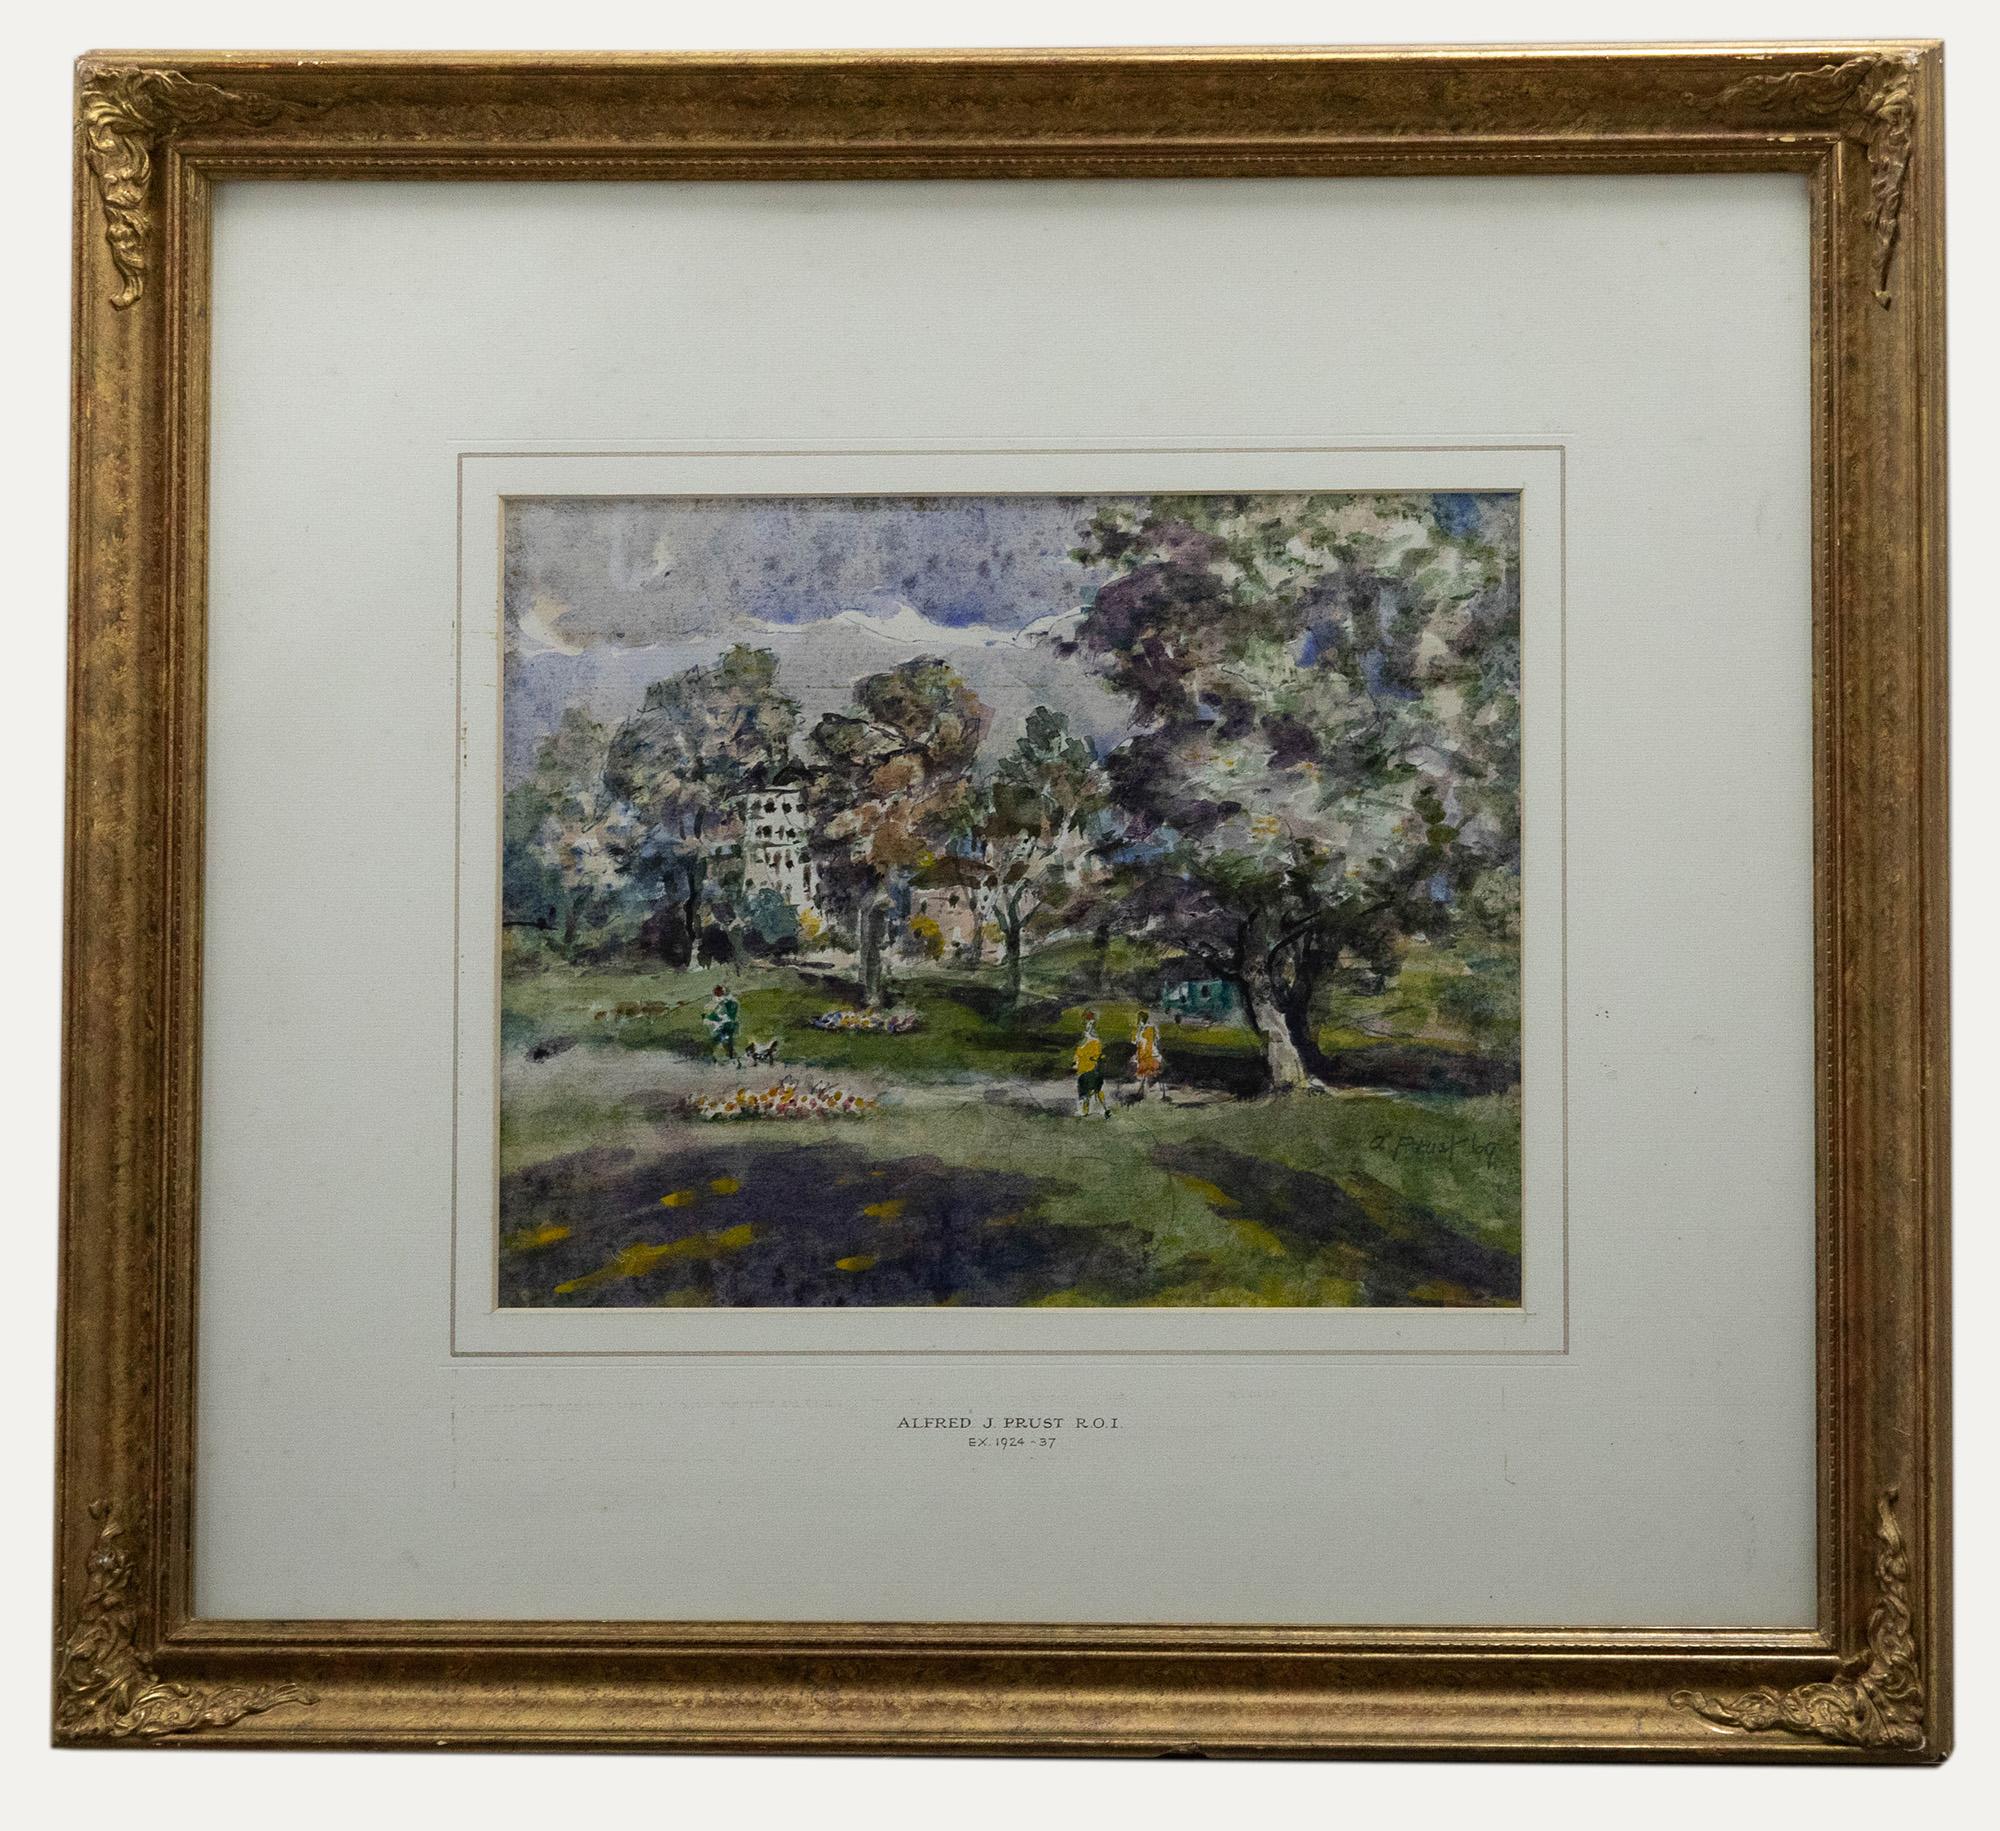 Unknown Landscape Art - Alfred J. Prust (exh.1924-1937) - 1969 Watercolour, The Park in Summer